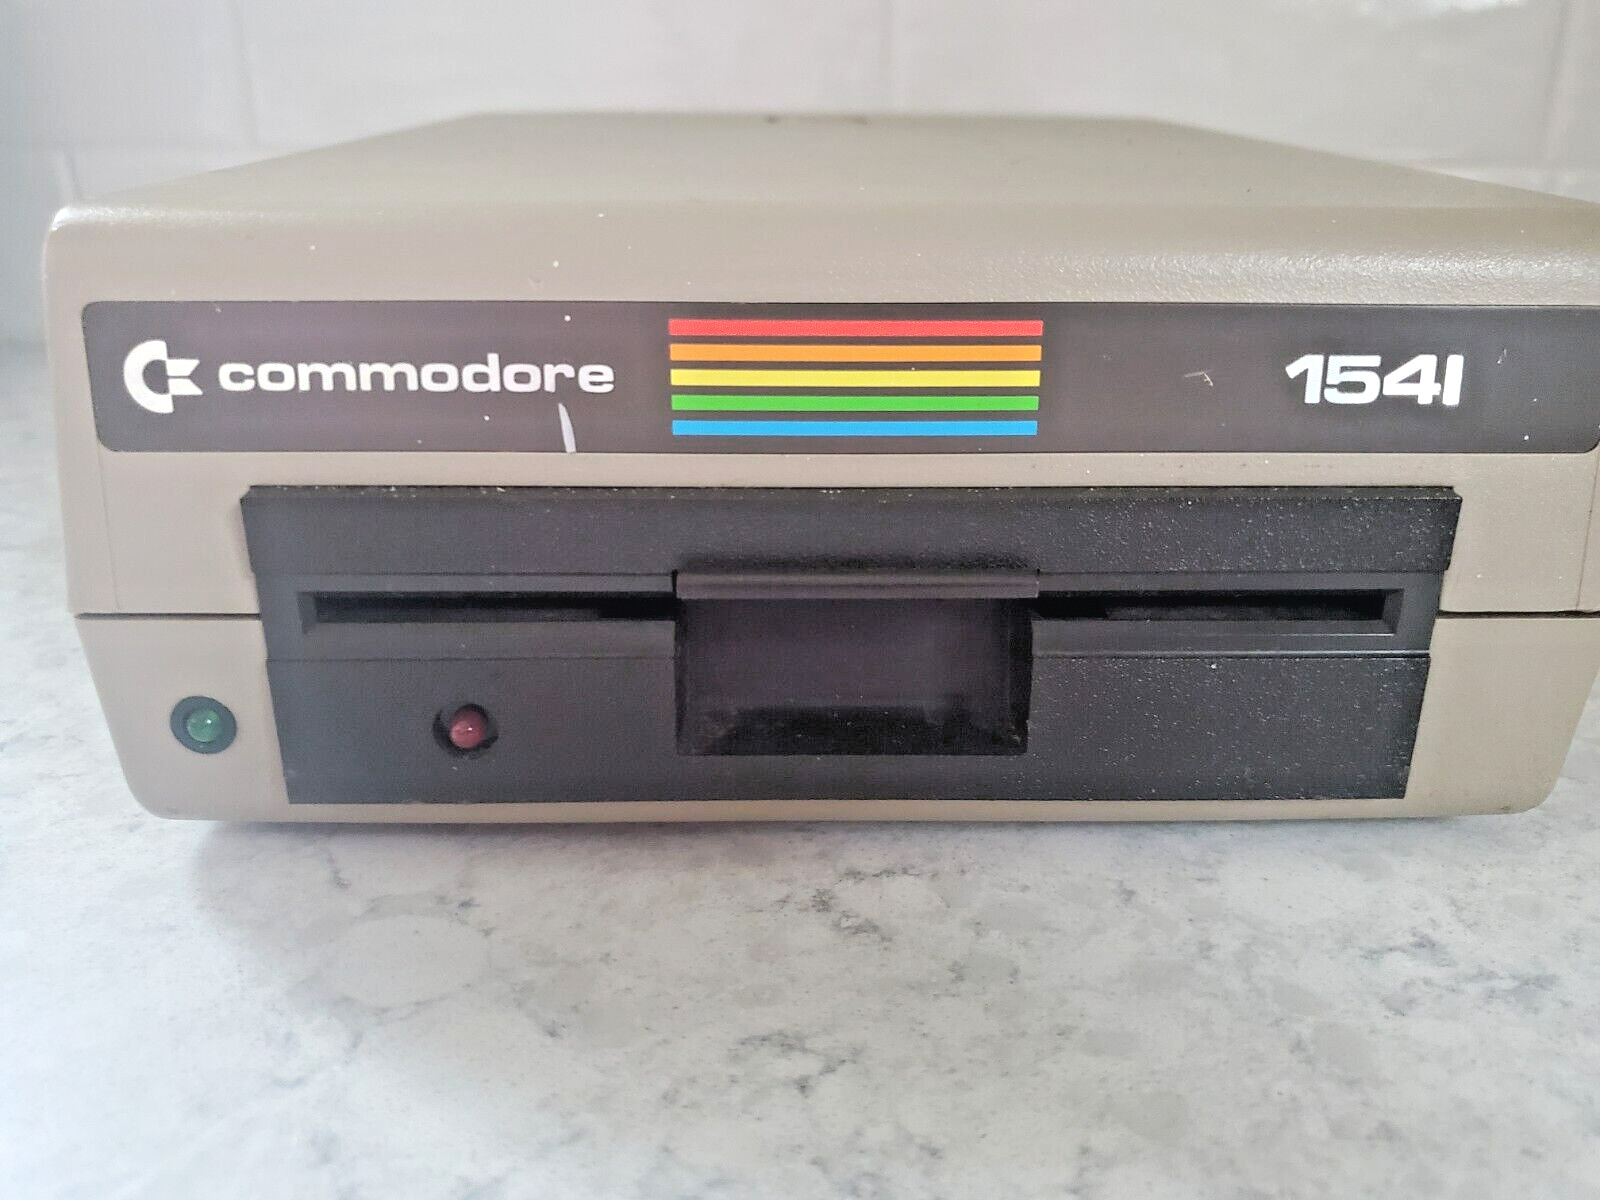 Commodore Floppy Disk Drive Model 1541 Untested